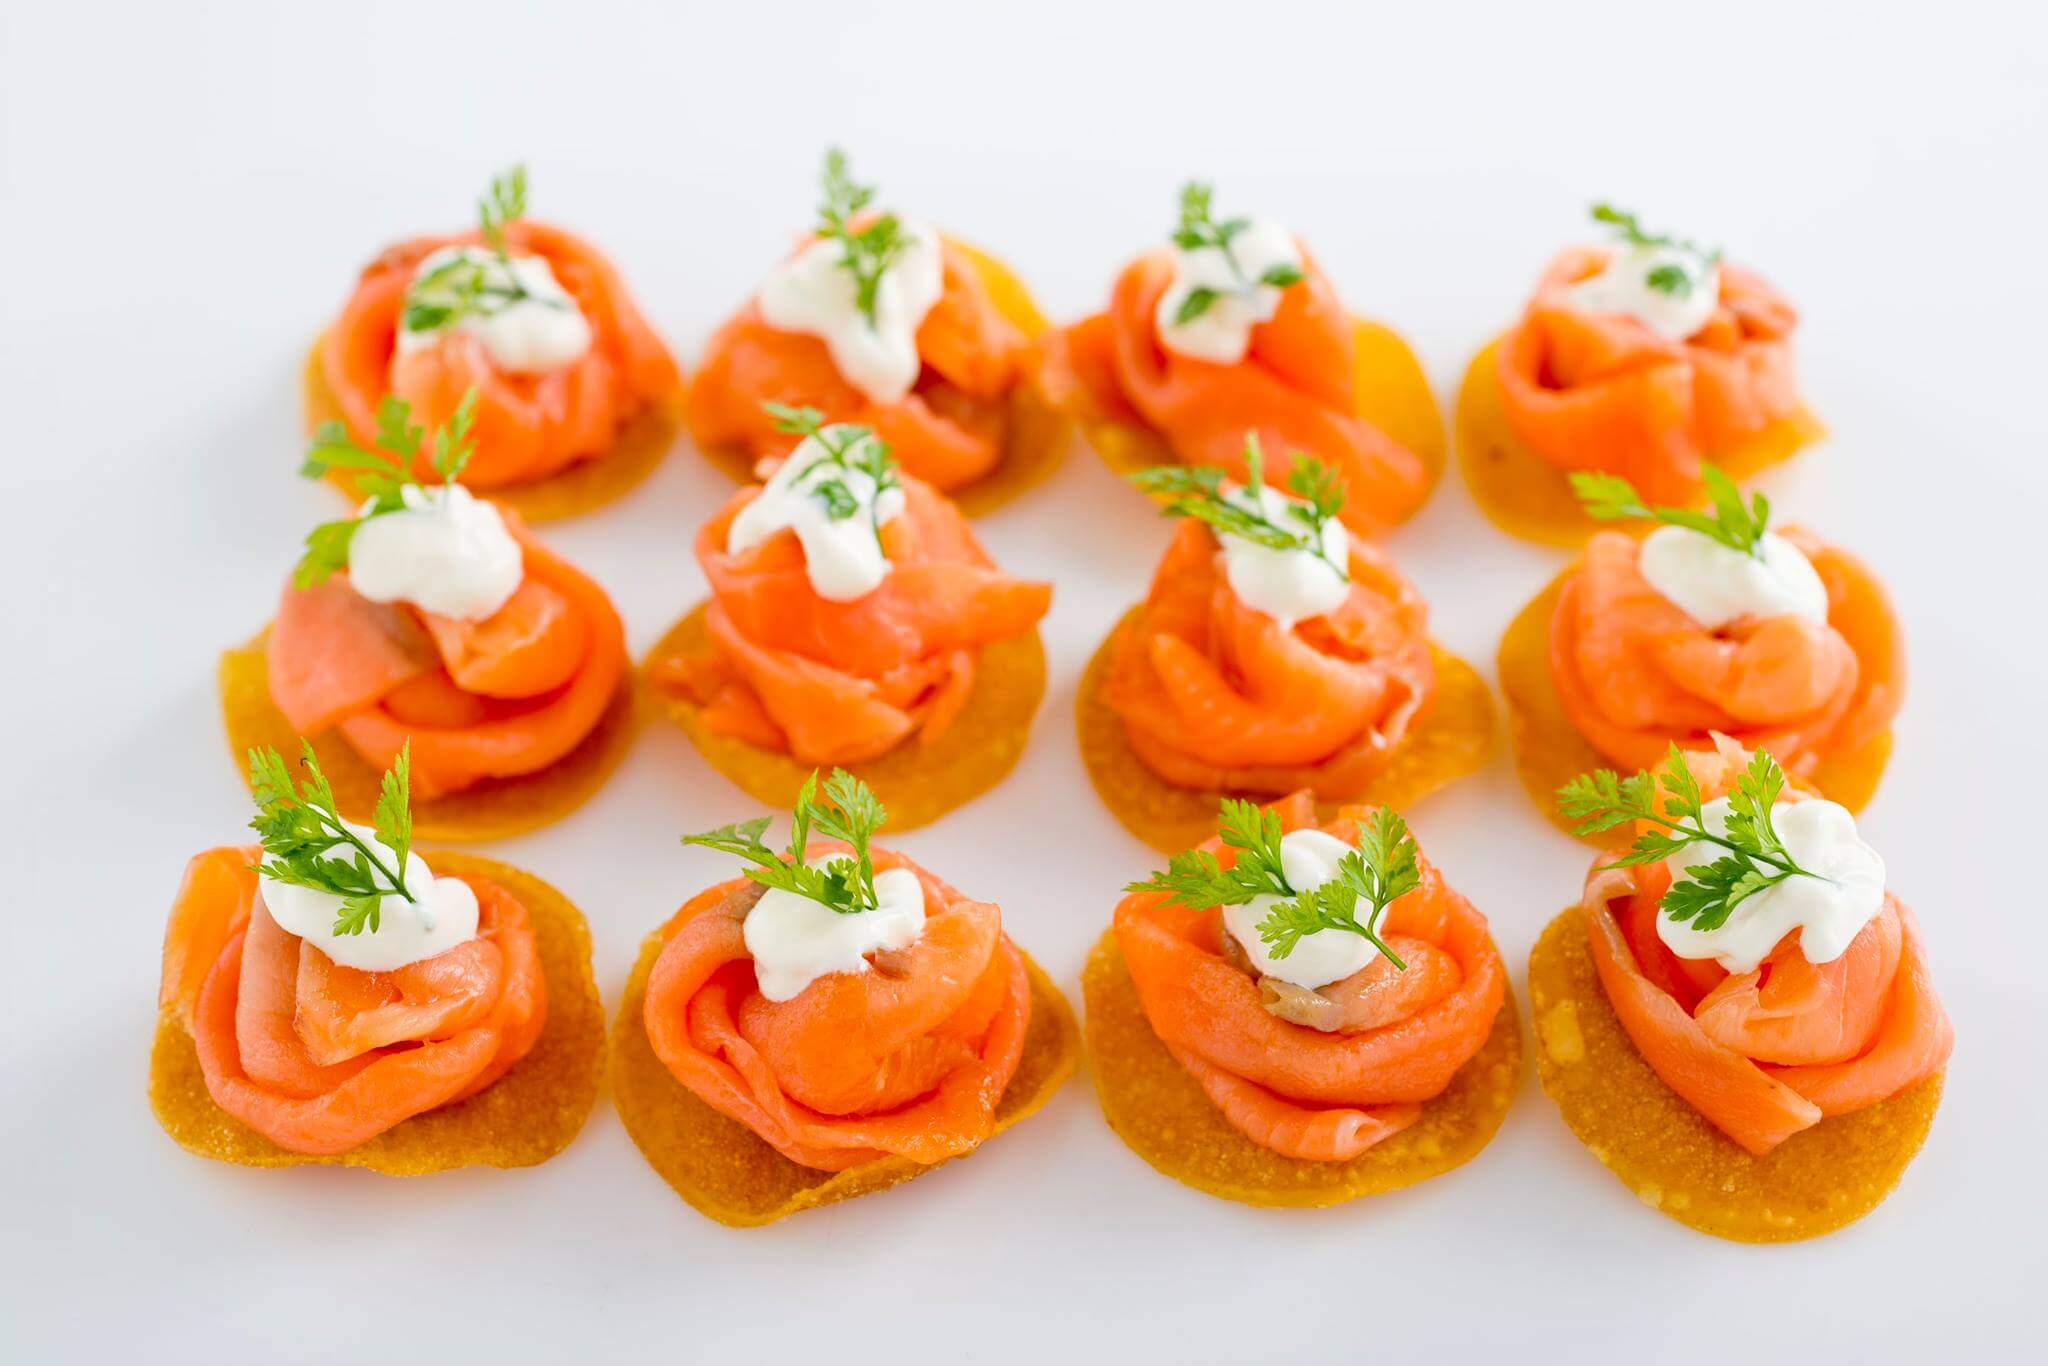 Top 8 Canape Catering Services in Singapore in 2018